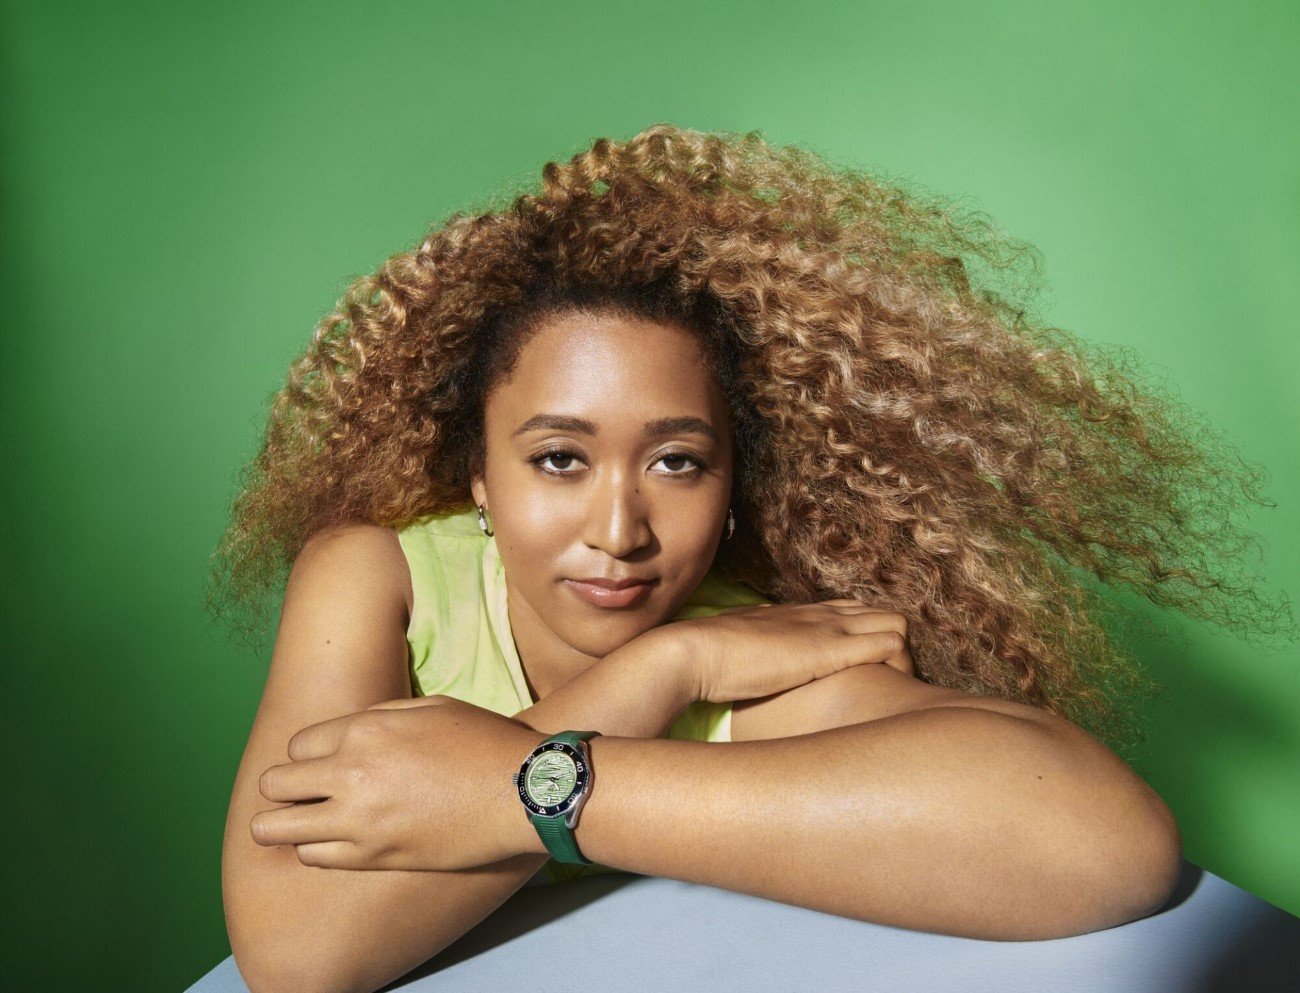 Naomi Osaka Covers Vogue Japan, Saying She Will Play Olympics — Anne of  Carversville